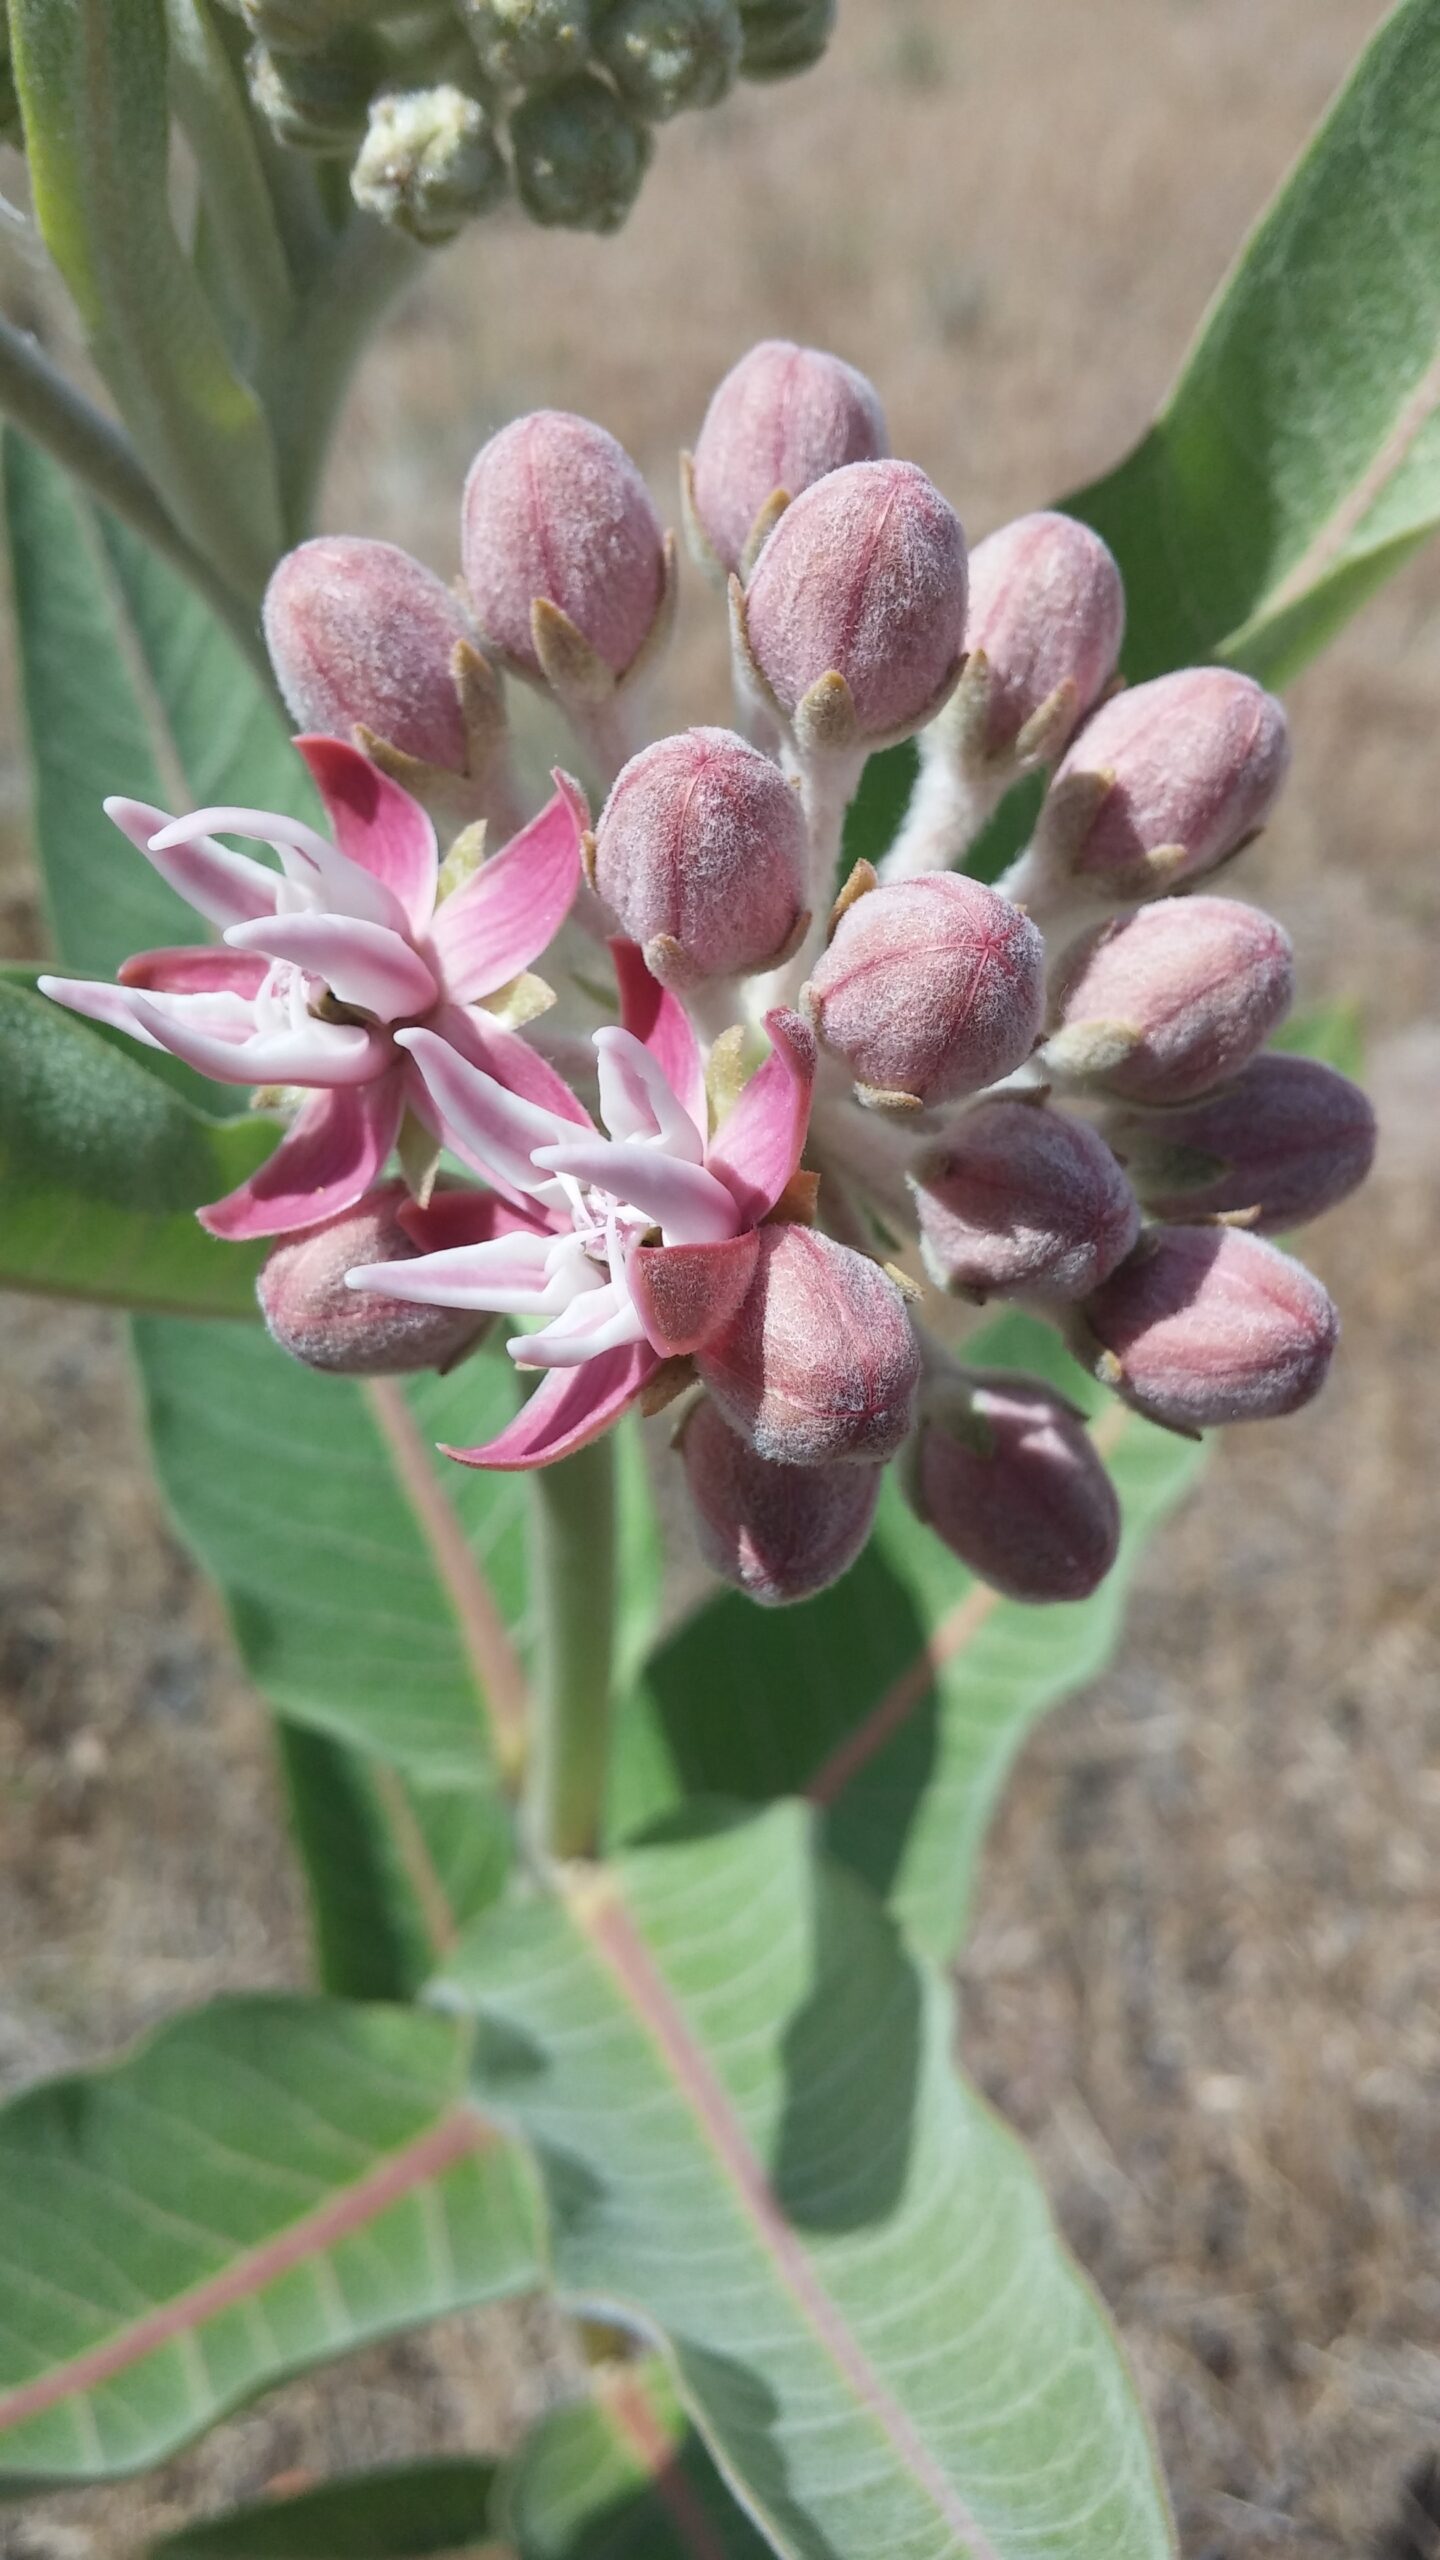 a closeup photo of showy milkweed flower buds. Some are still closed, with a fuzzy almost frosted pink appearance. Two flowers are blooming, revealing lovely pastel pink petals. in the background are the light green dusty leaves of the milkweed plant.